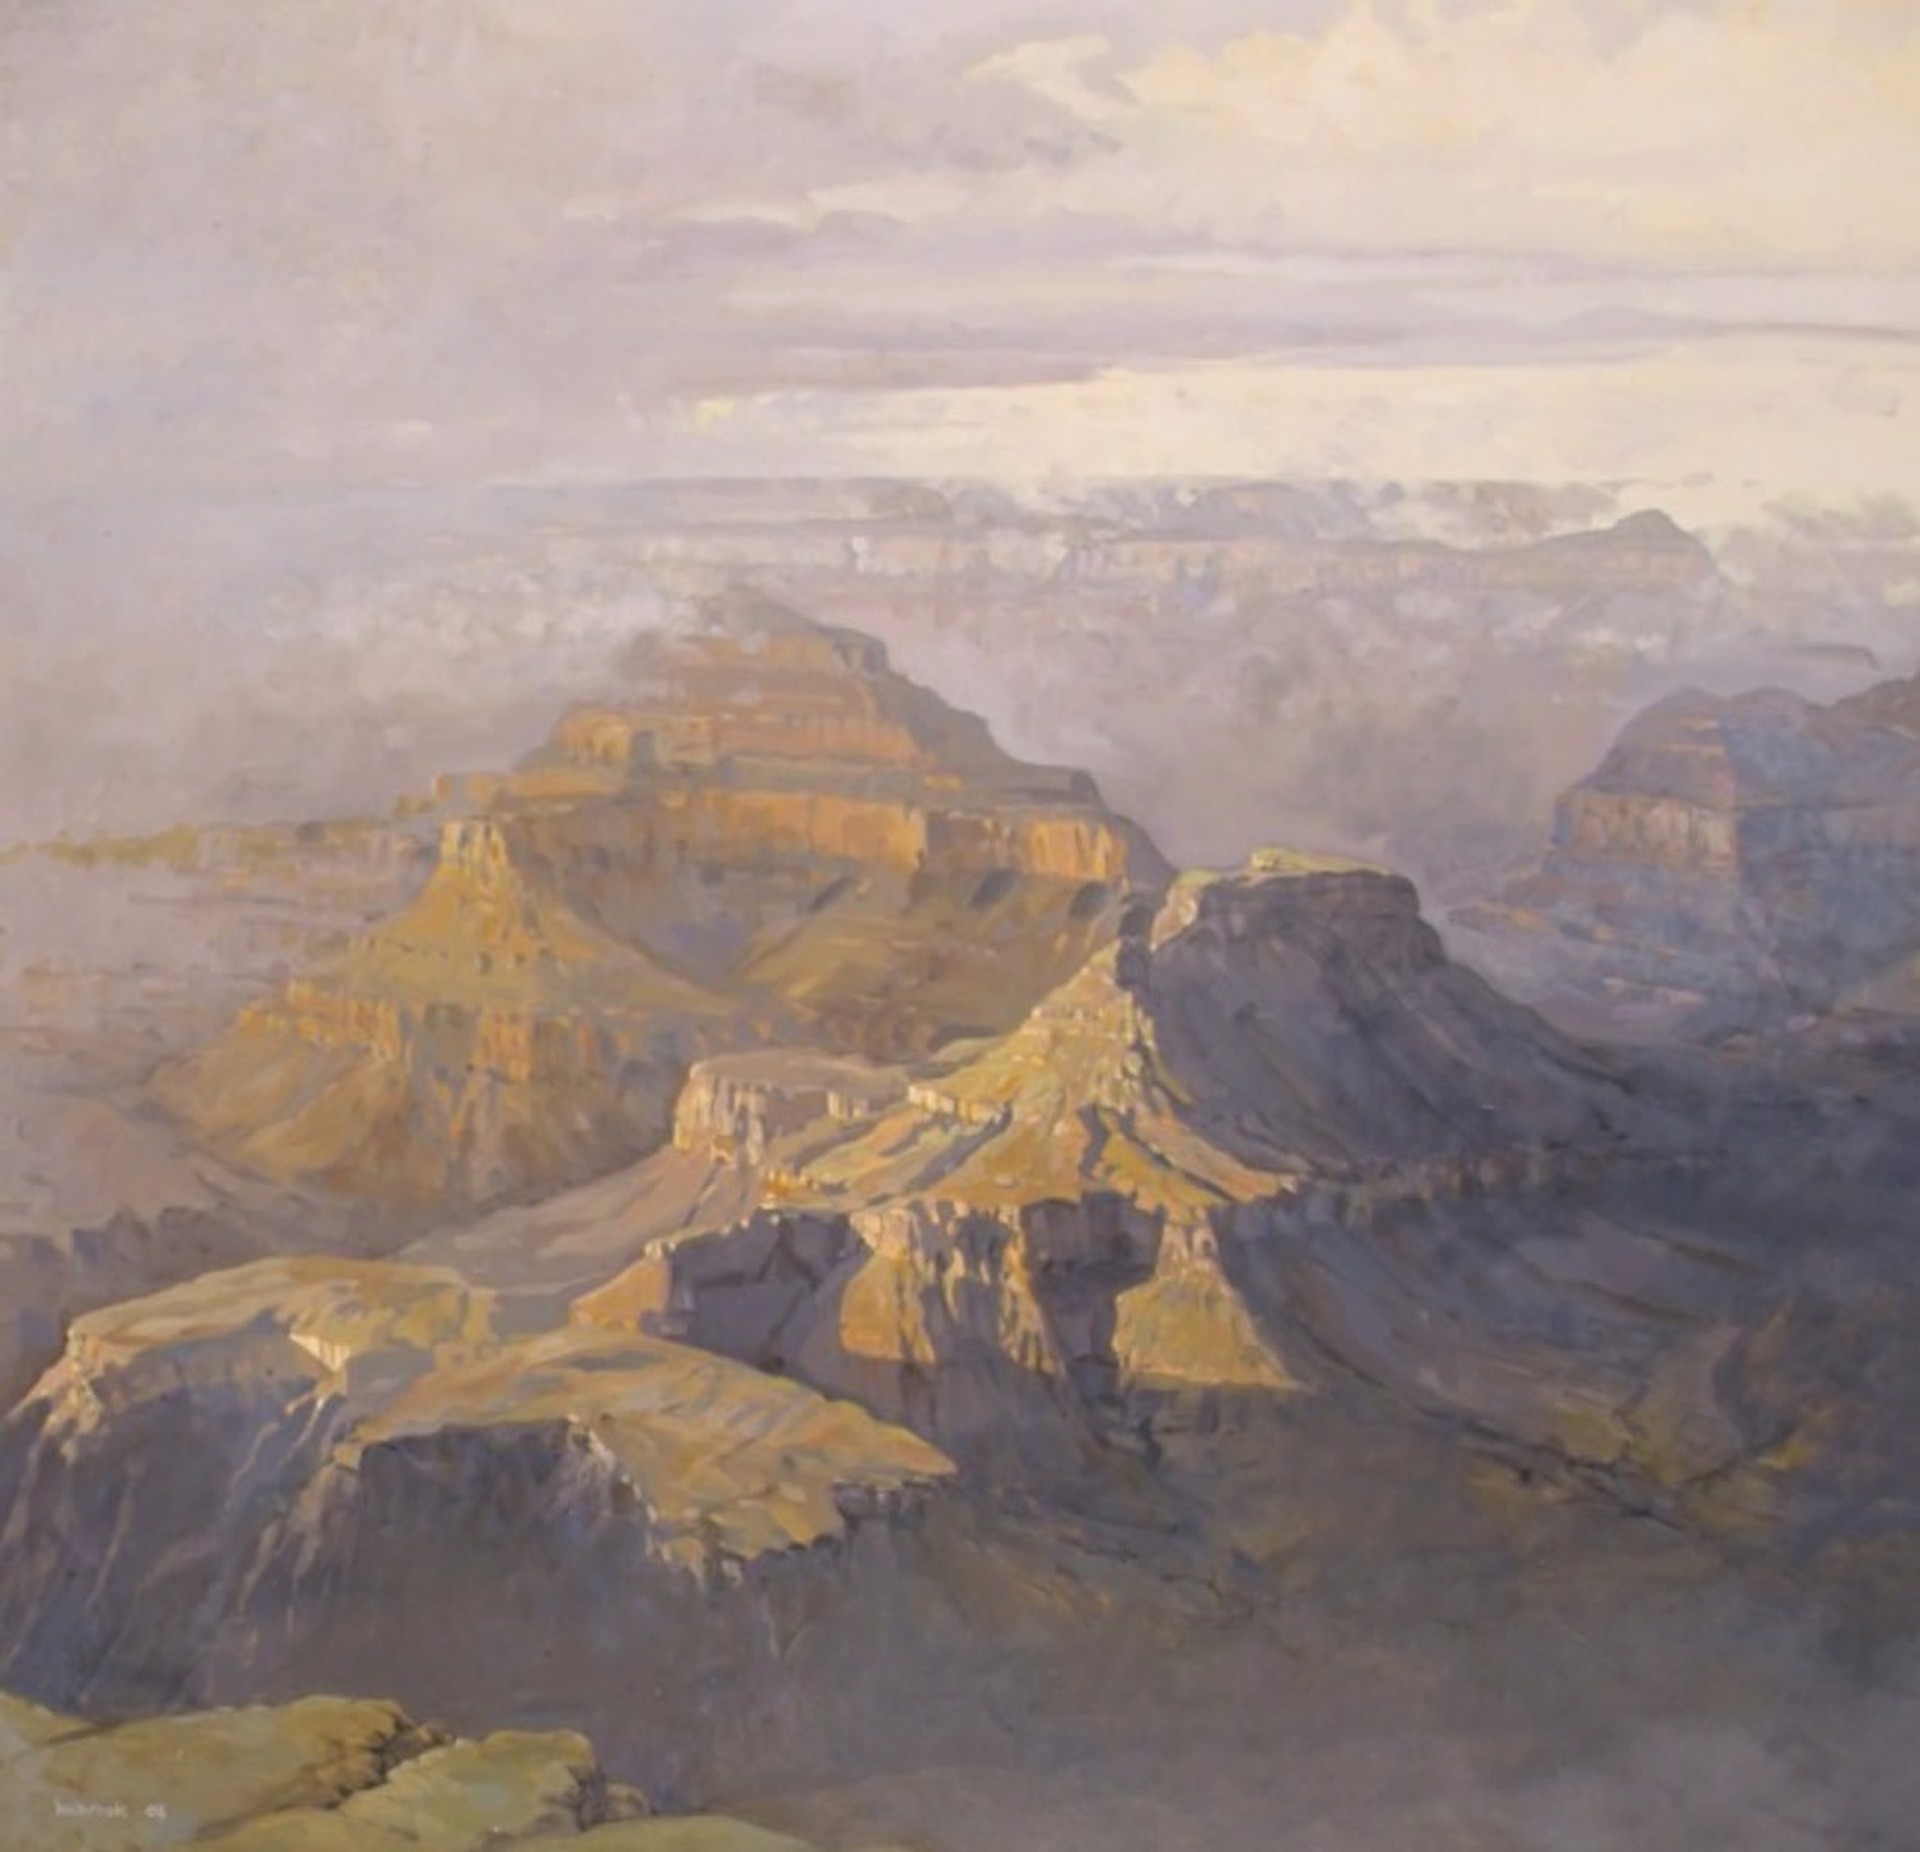 Storm at Cheops Pyramid by Peter Holbrook